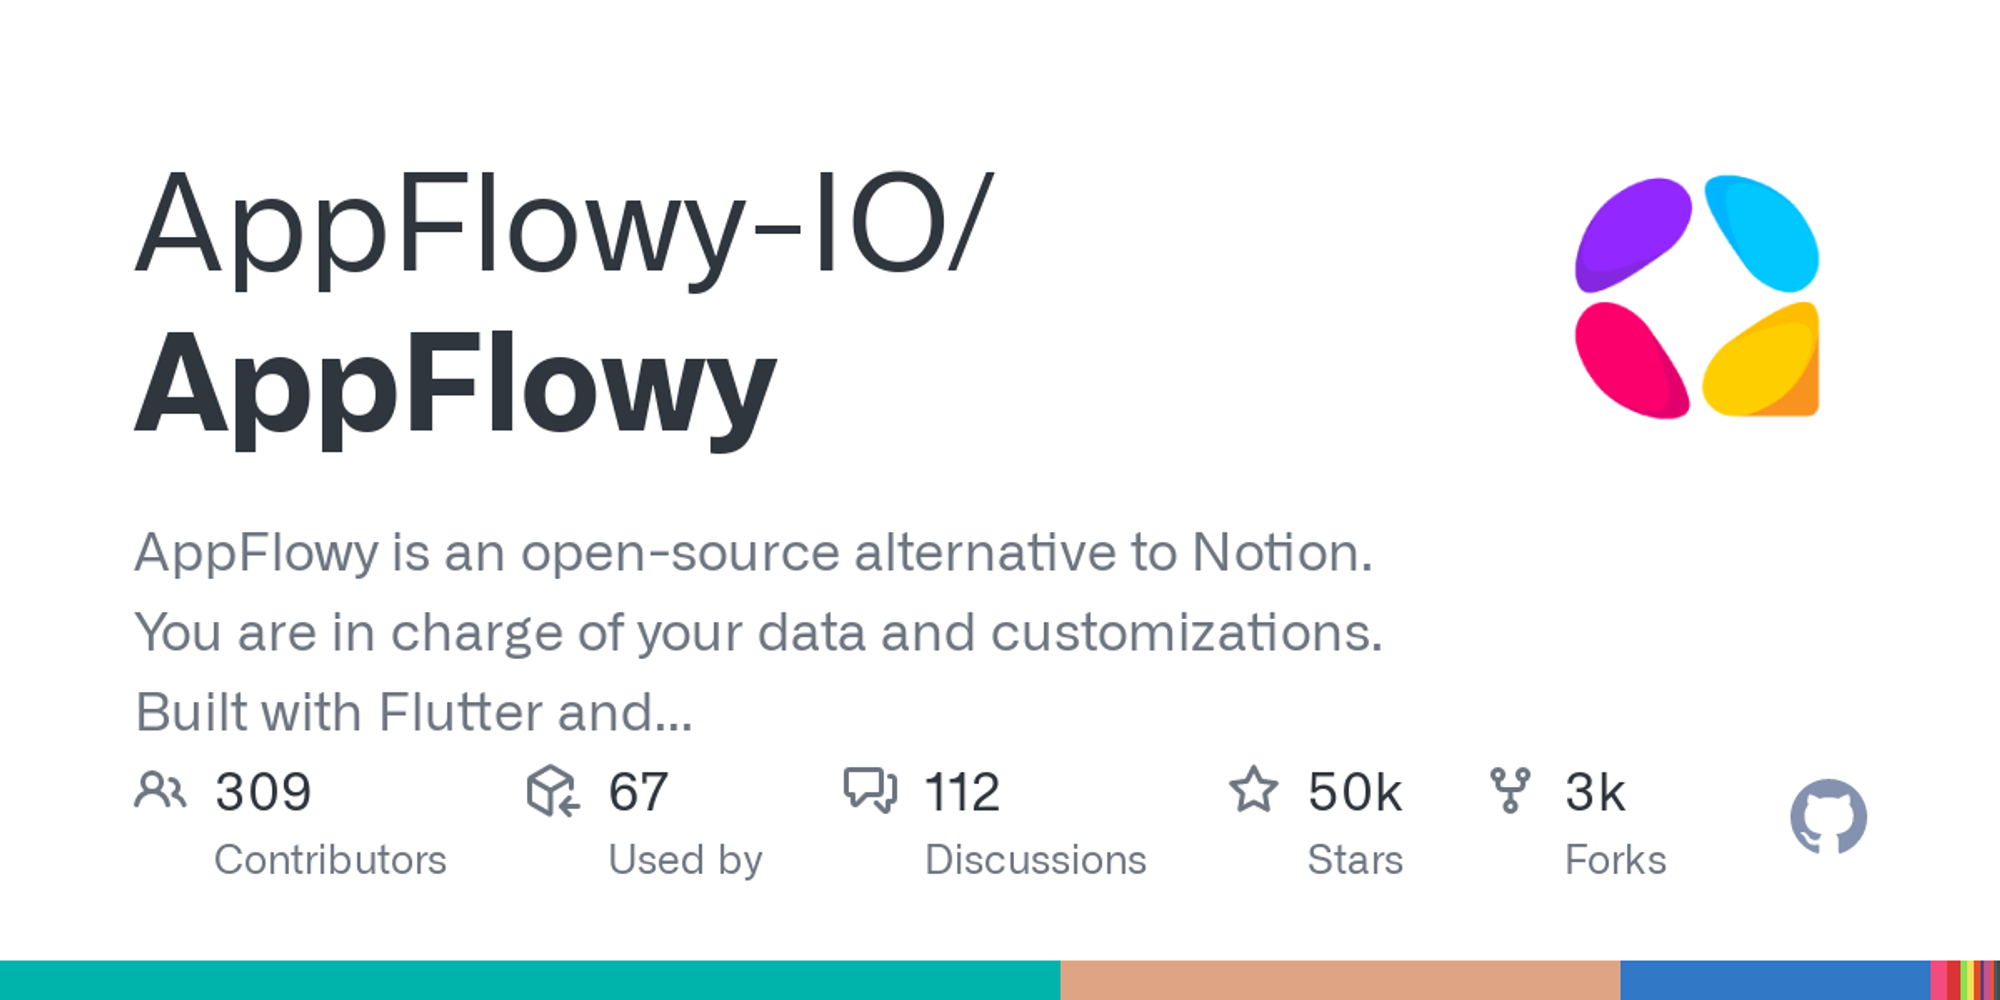 GitHub - AppFlowy-IO/AppFlowy: AppFlowy is an open-source alternative to Notion. You are in charge of your data and customizations. Built with Flutter and Rust.